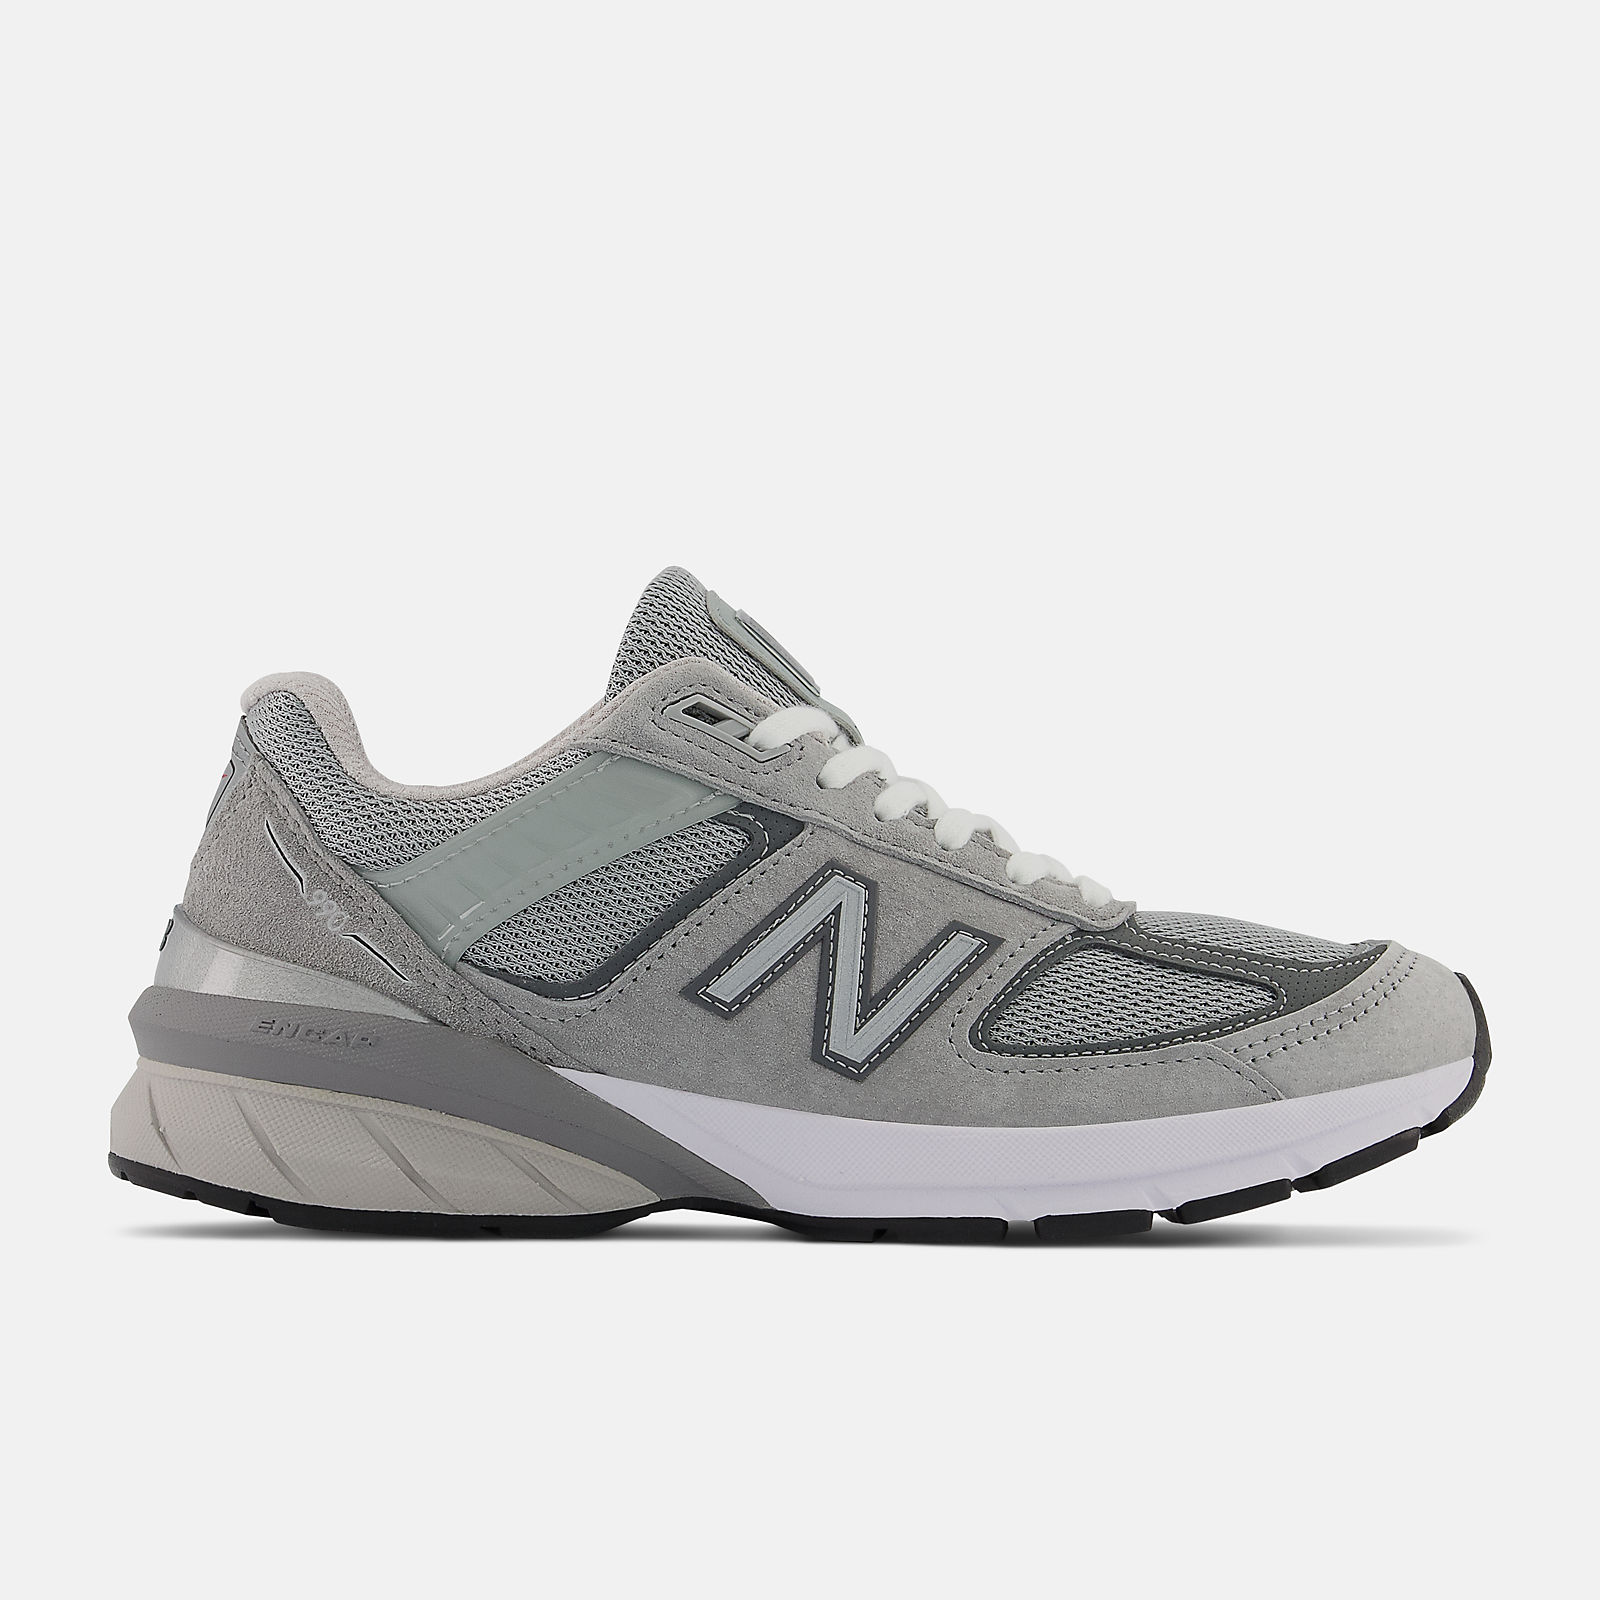 notification hire Play sports MADE in USA 990v5 Core - New Balance